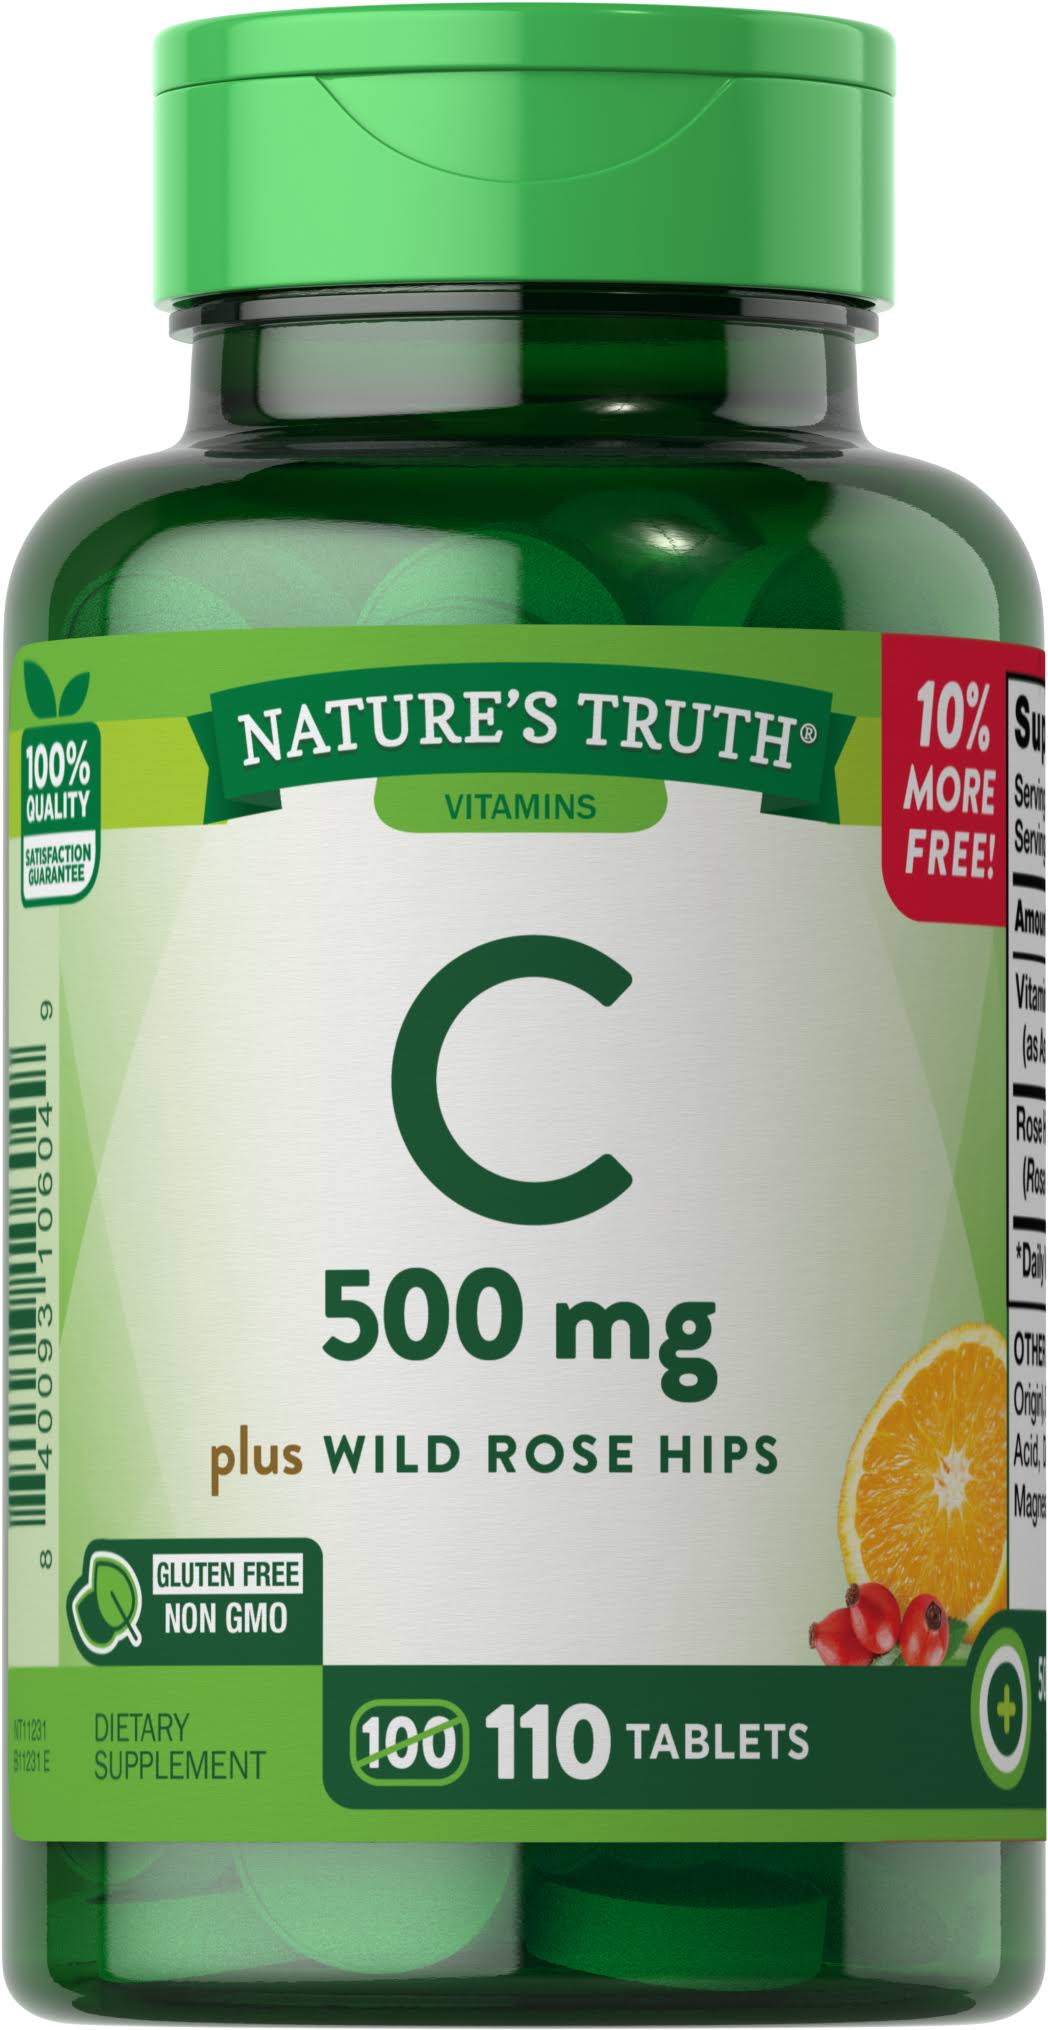 Nature's truth vitamin c, 500 mg, tablets, 110 ea